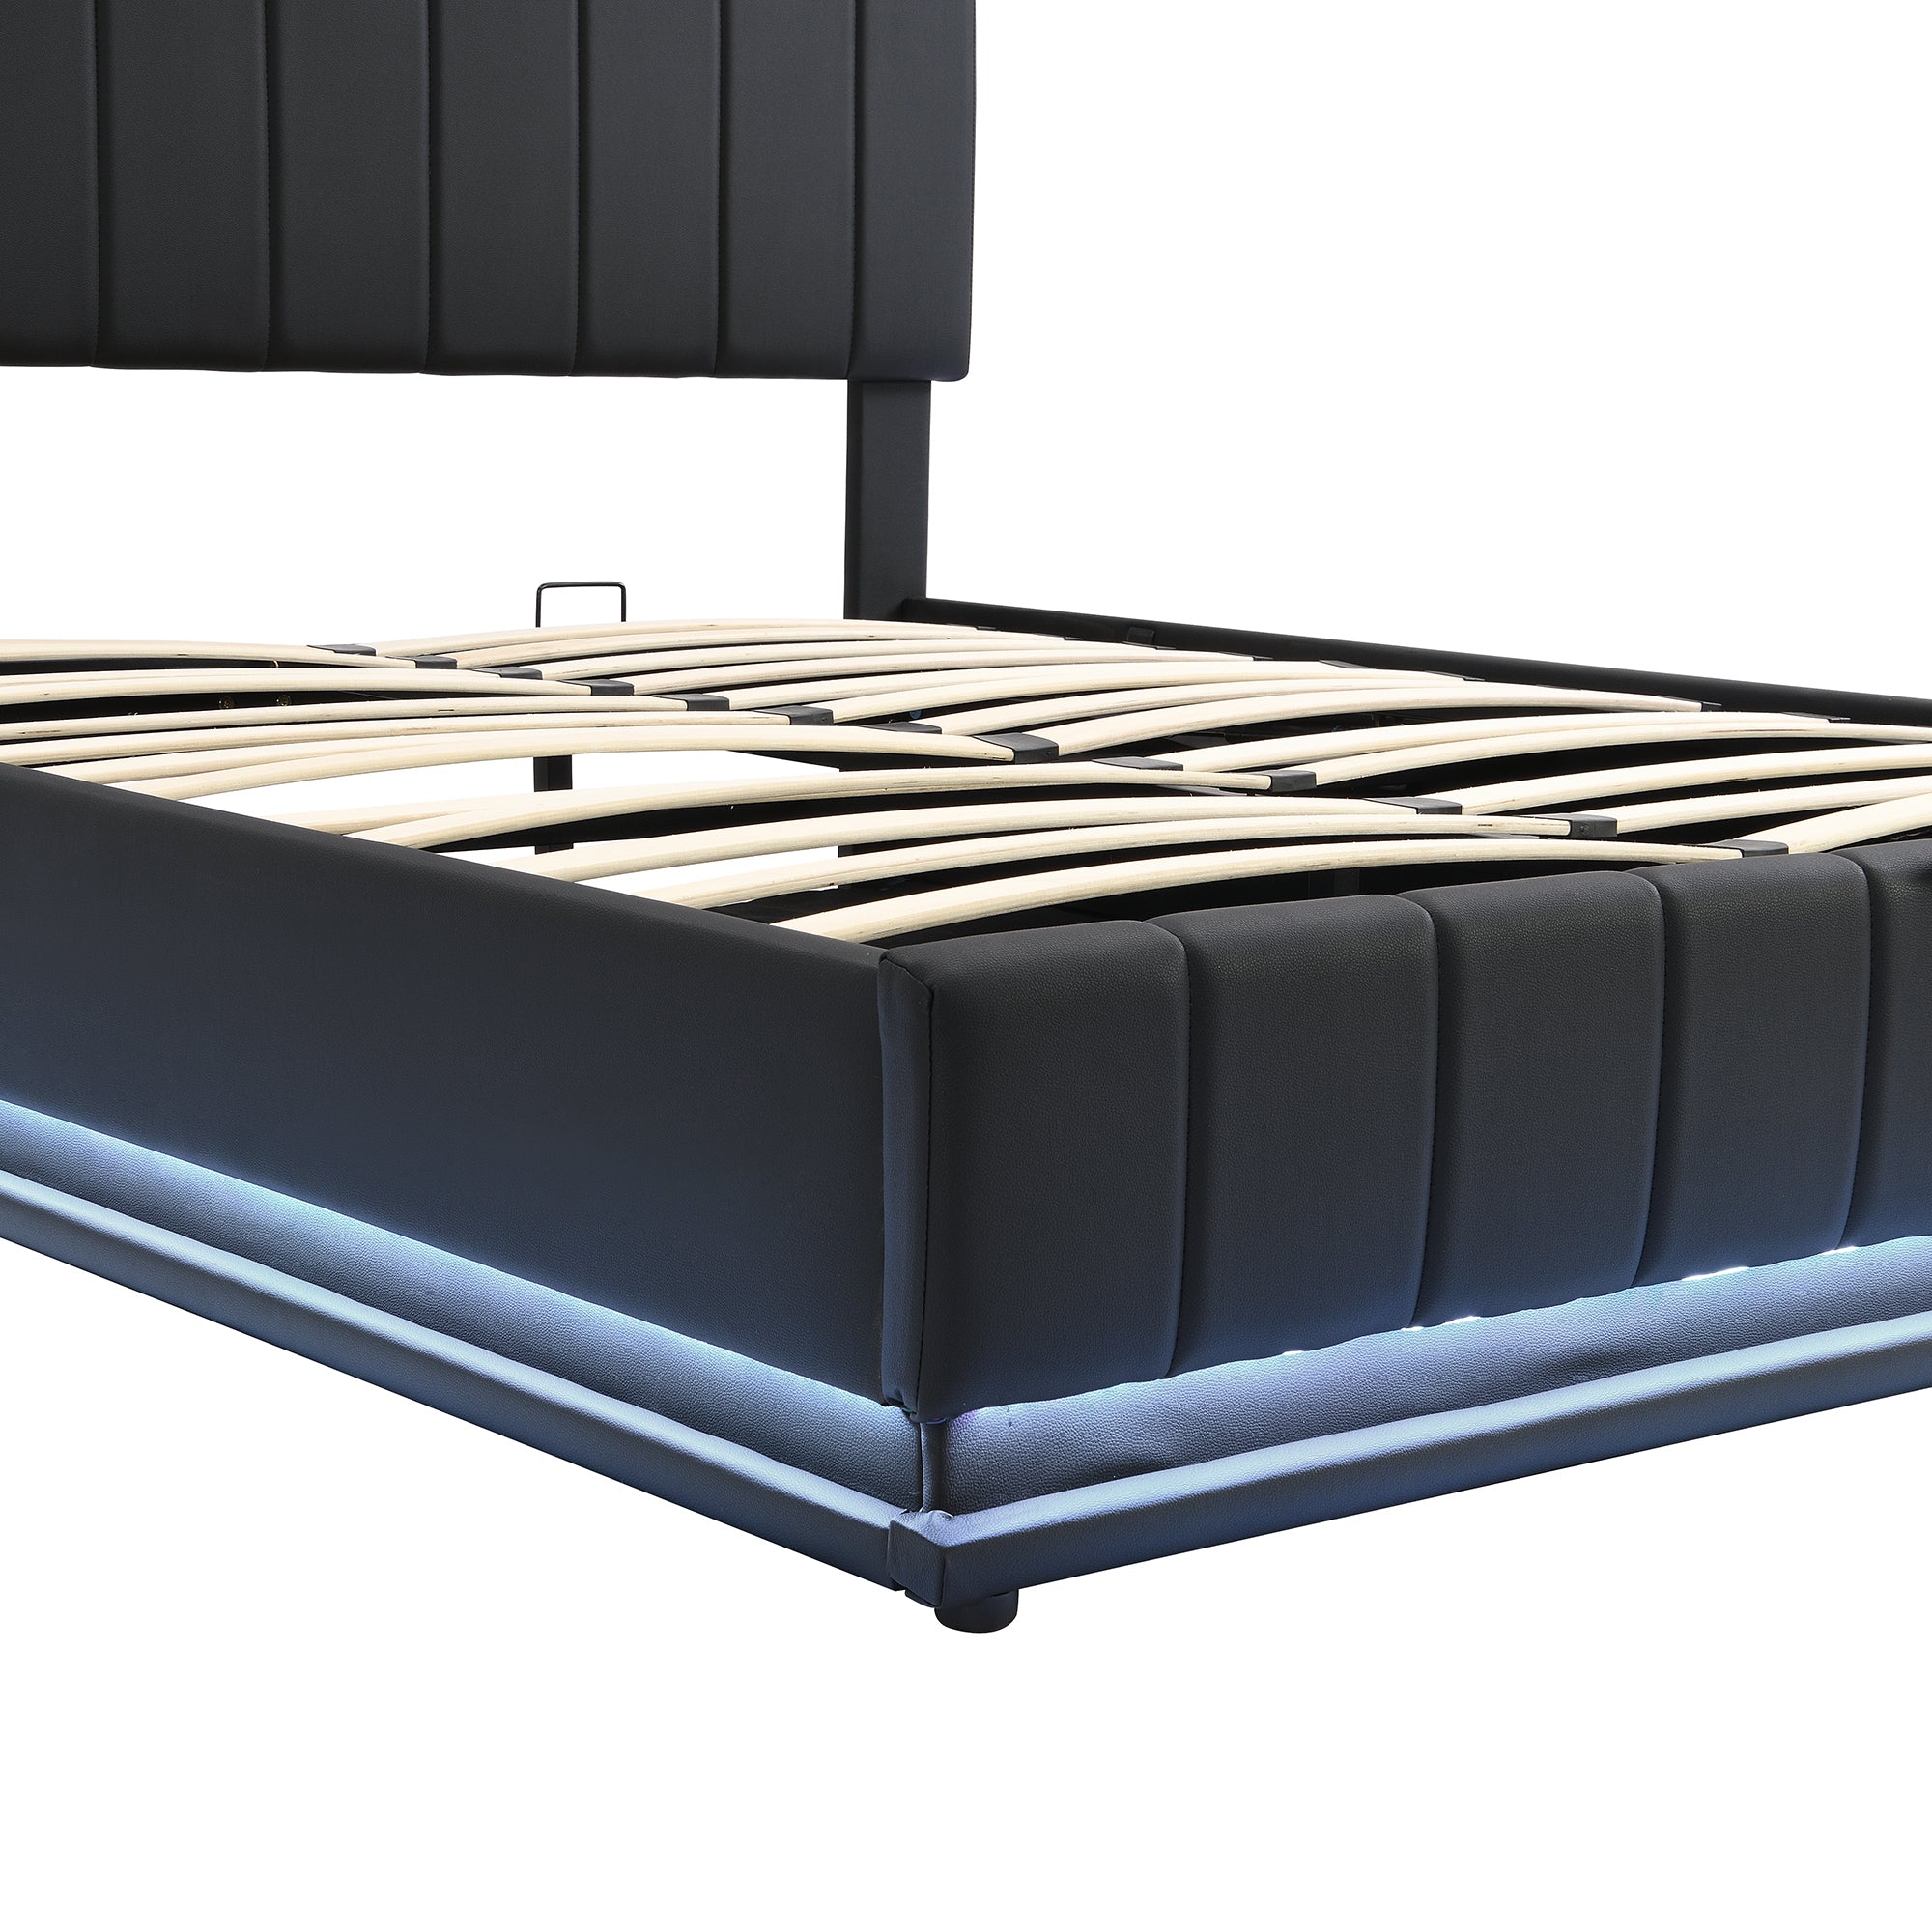 Skylar Black Faux Leather Queen Platform Bed with Hydraulic Storage System and LED Light, Modern Platform Bed with Sockets and USB Ports